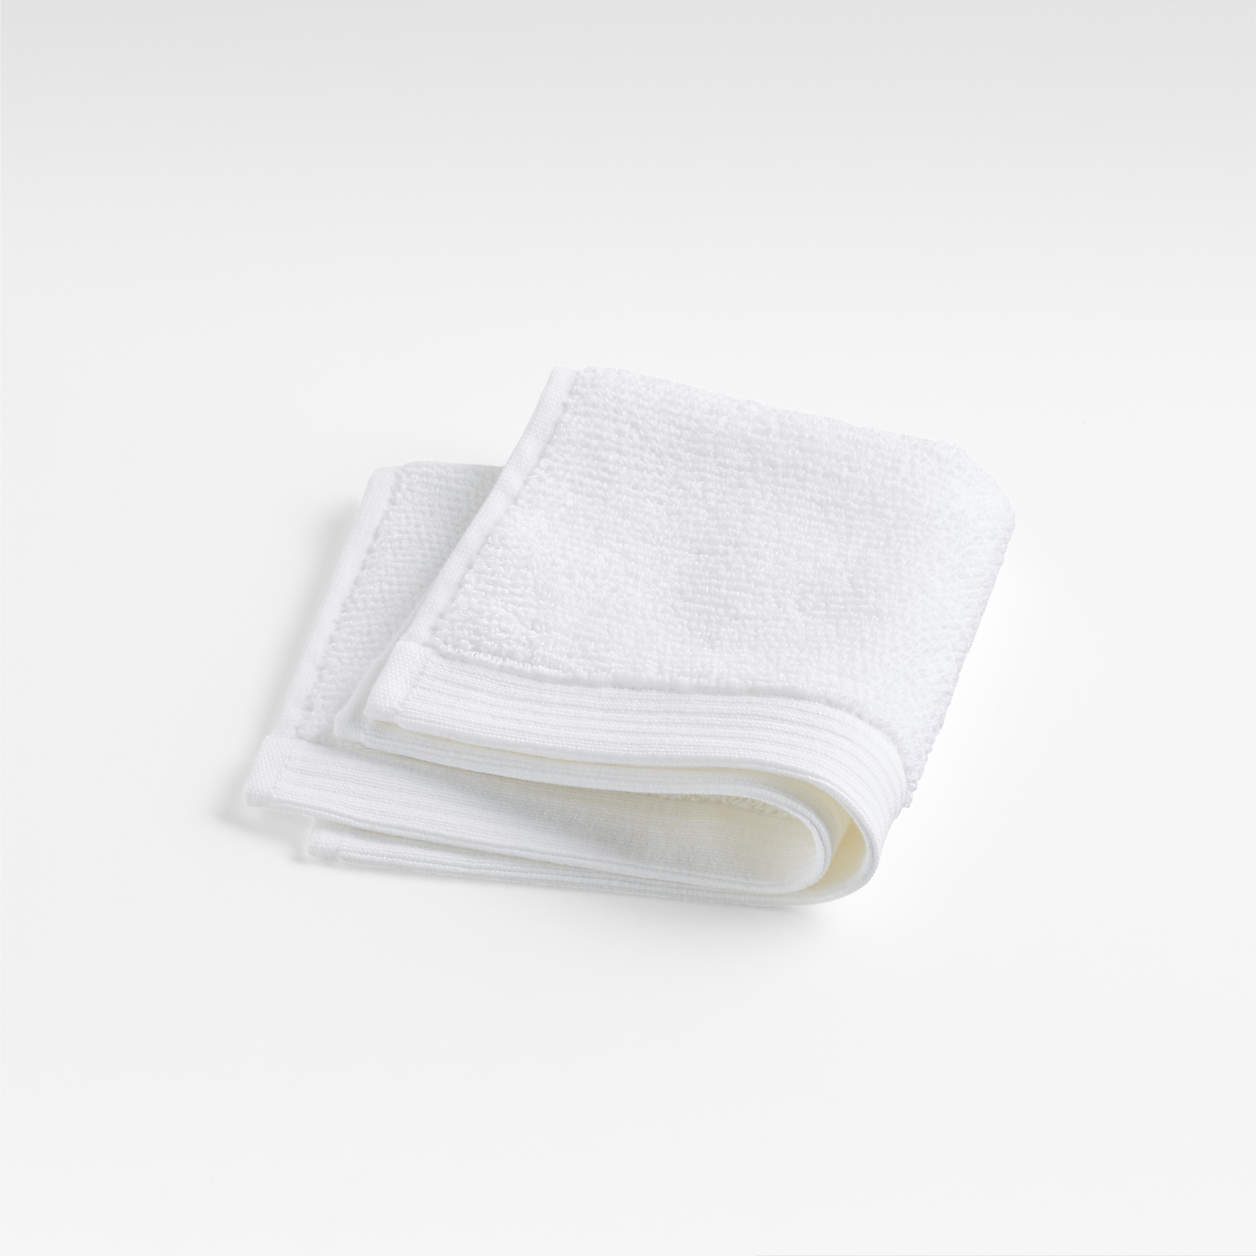 Bright White Antimicrobial Organic Cotton Washcloth + Reviews | Crate ...